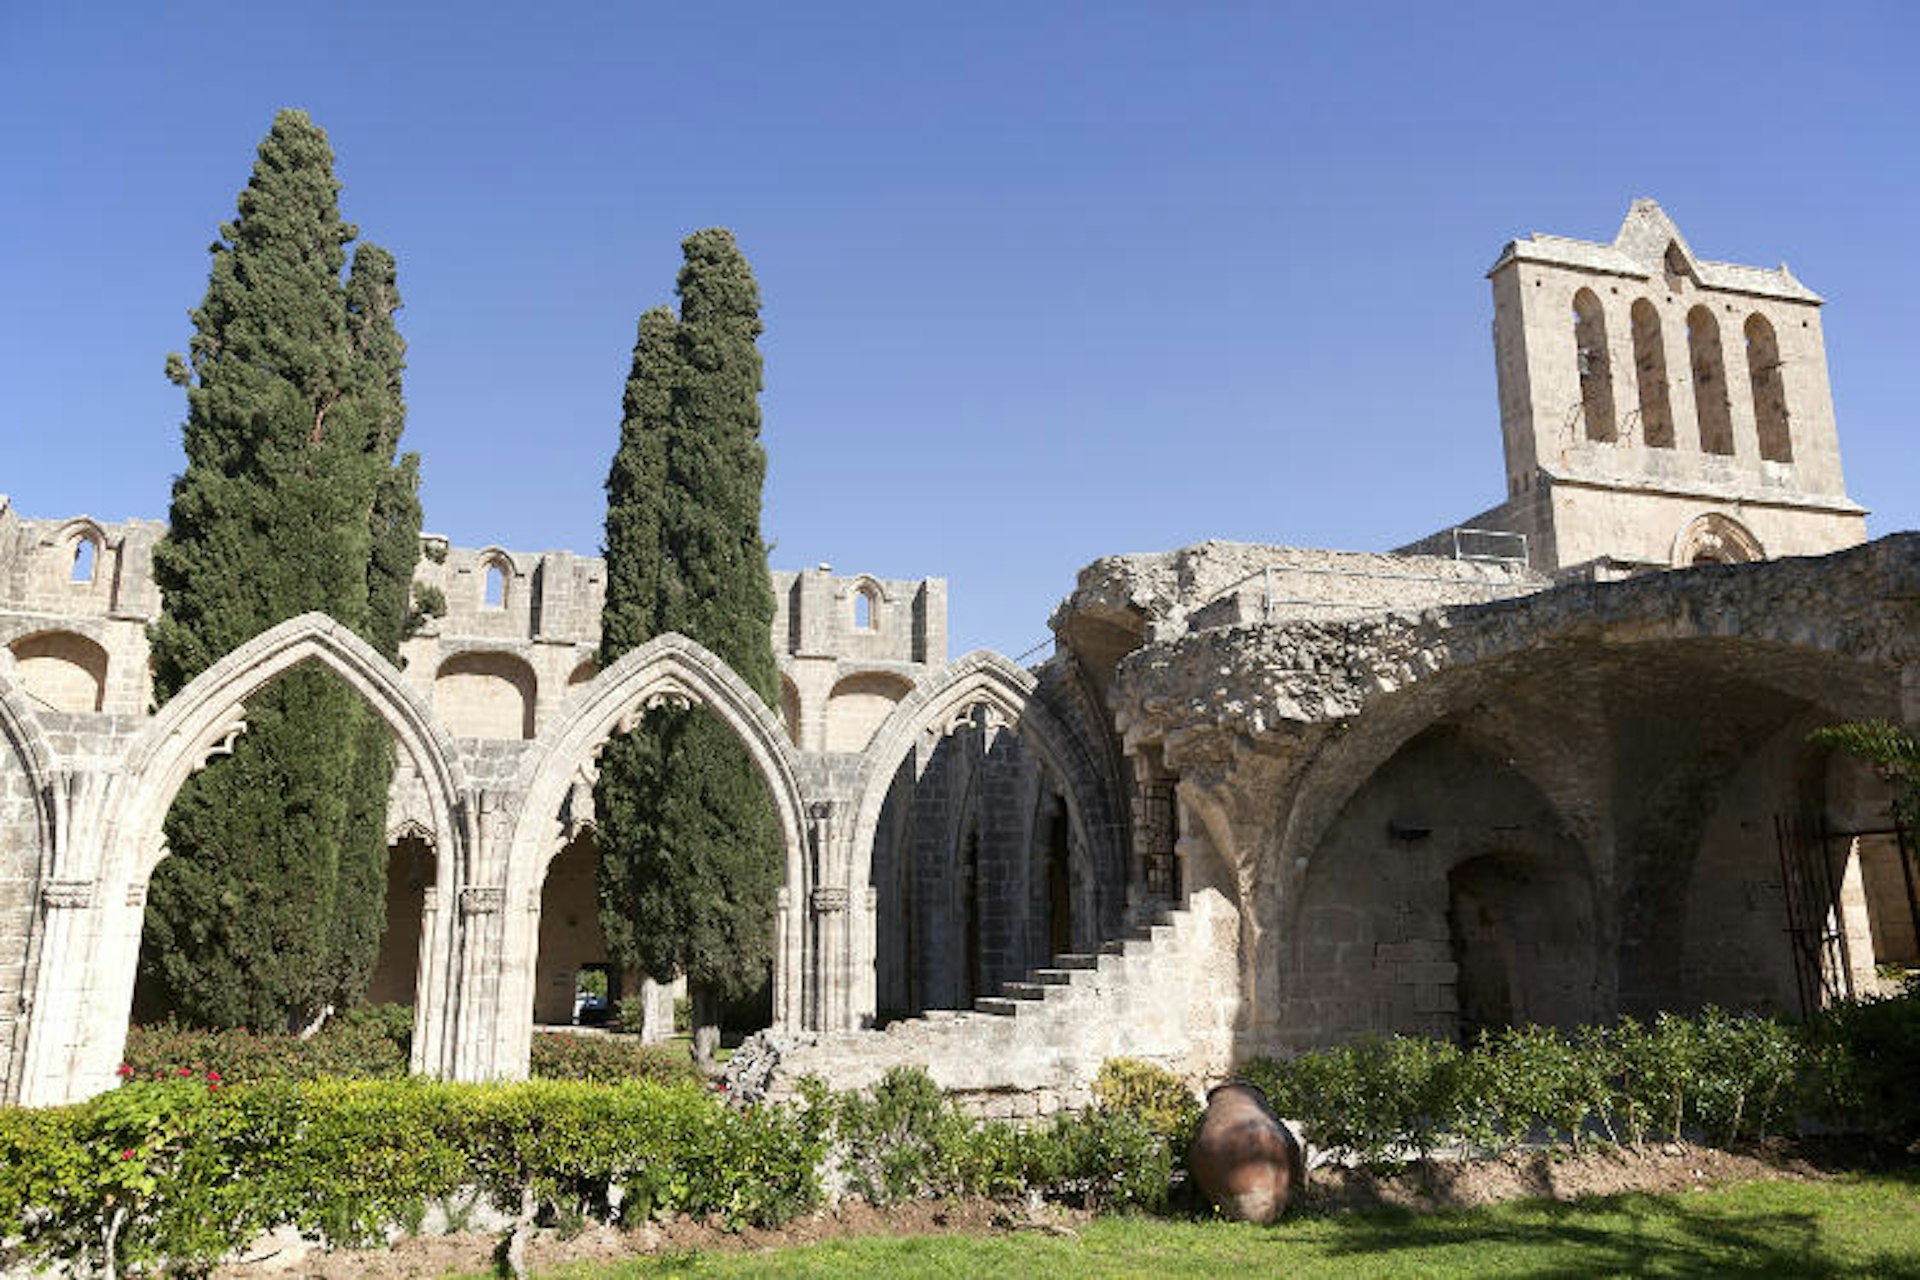 The 12th-century Bellapais Abbey. Image by Gokhan Ilgaz / Getty Images